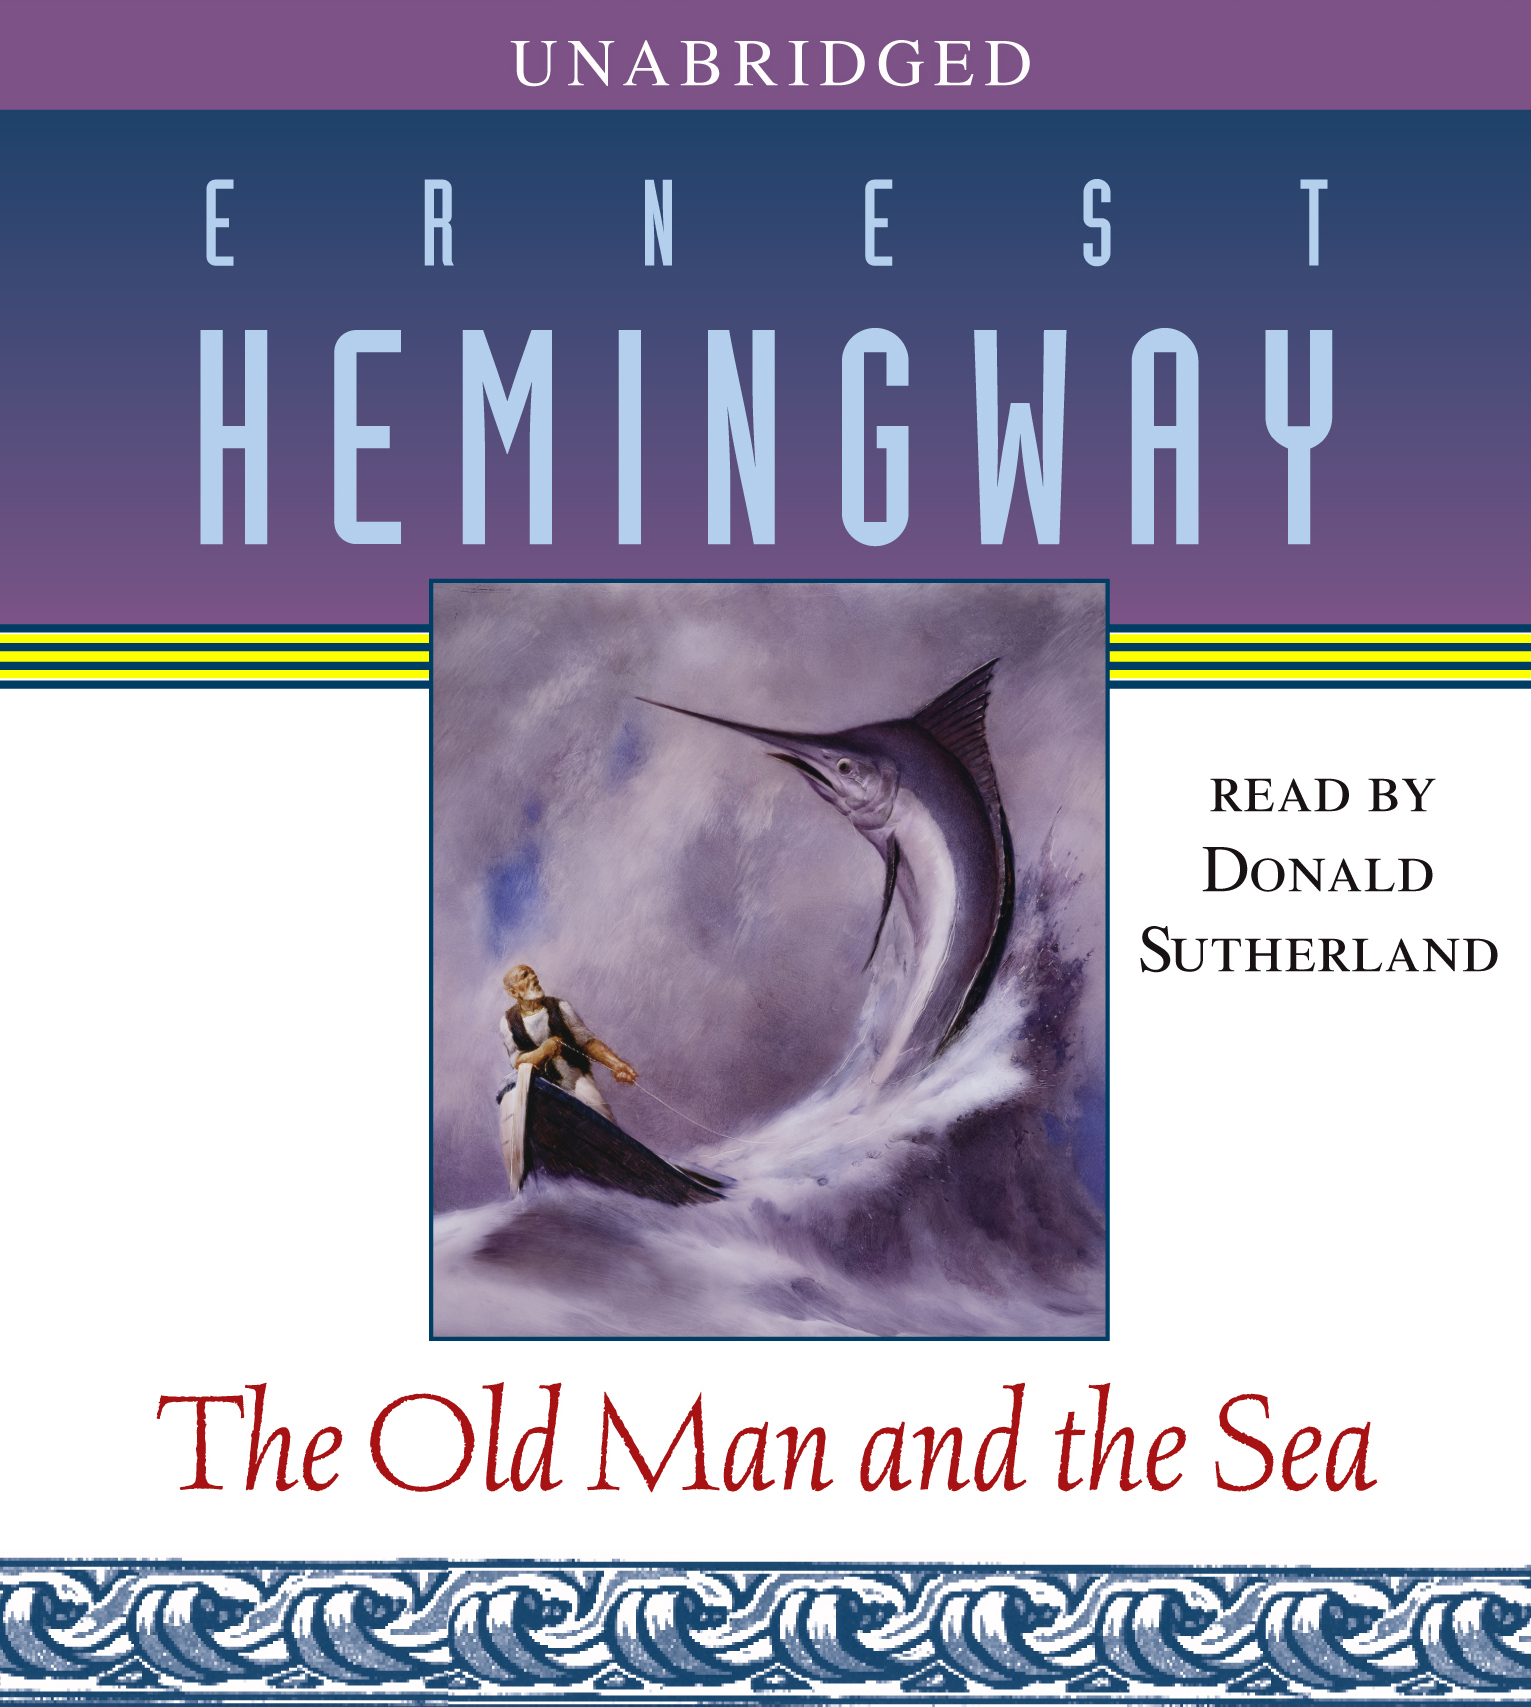 The Old Man and the Sea – Ernest Hemingway